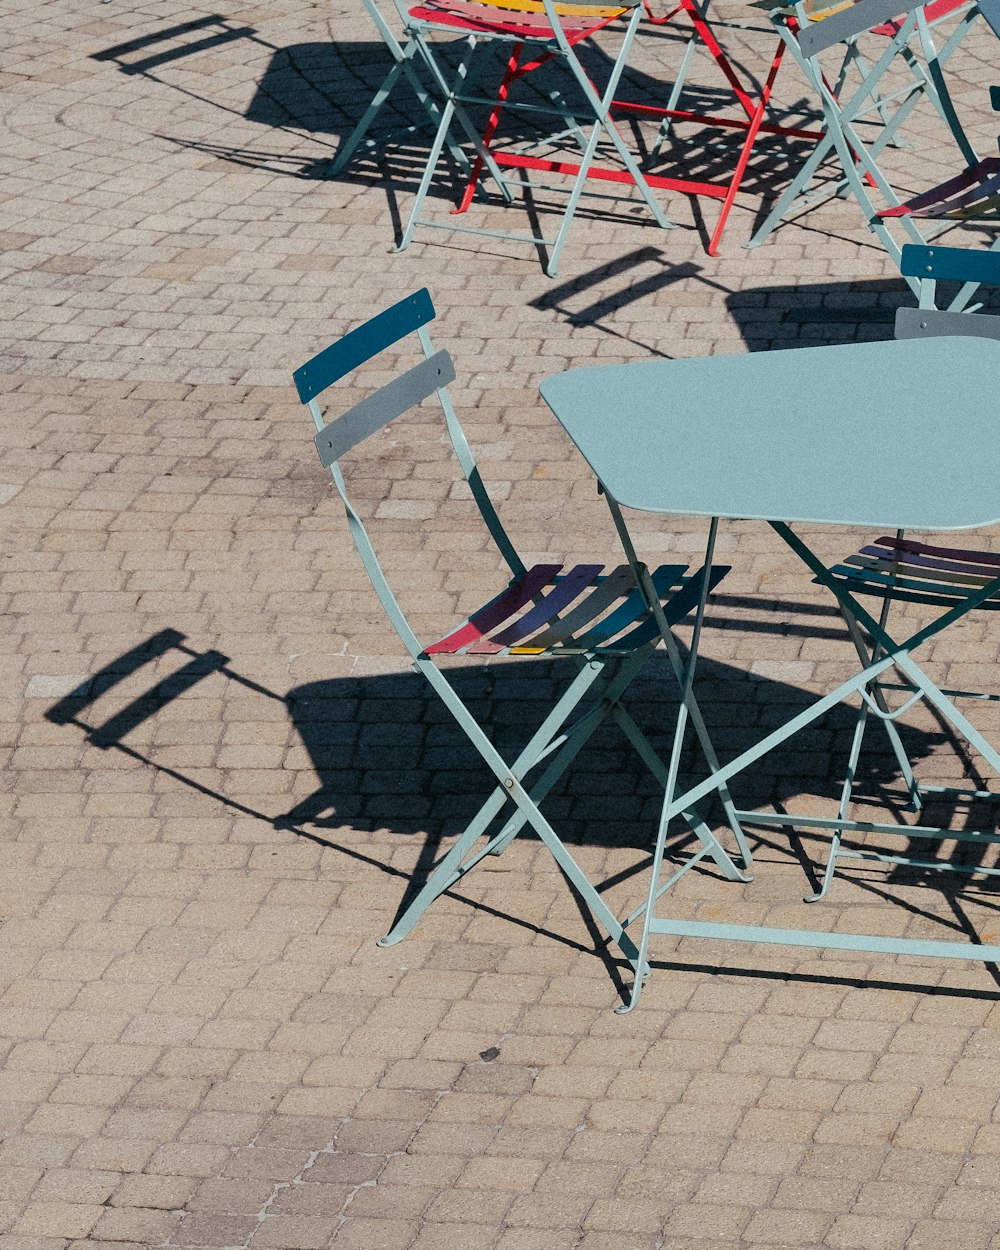 a group of chairs and a table on a sidewalk